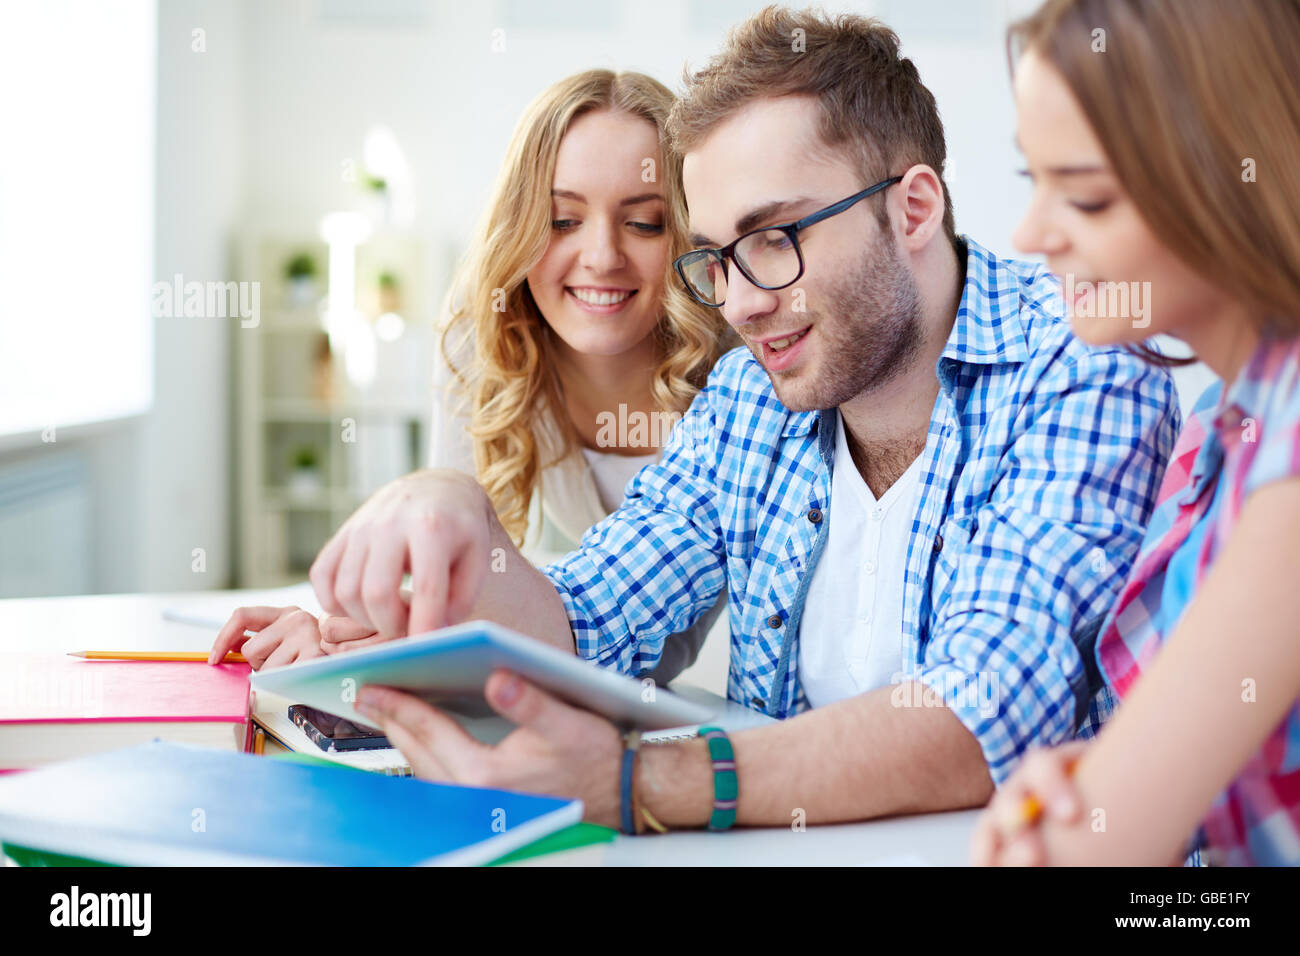 Contemporary teens networking in college Stock Photo